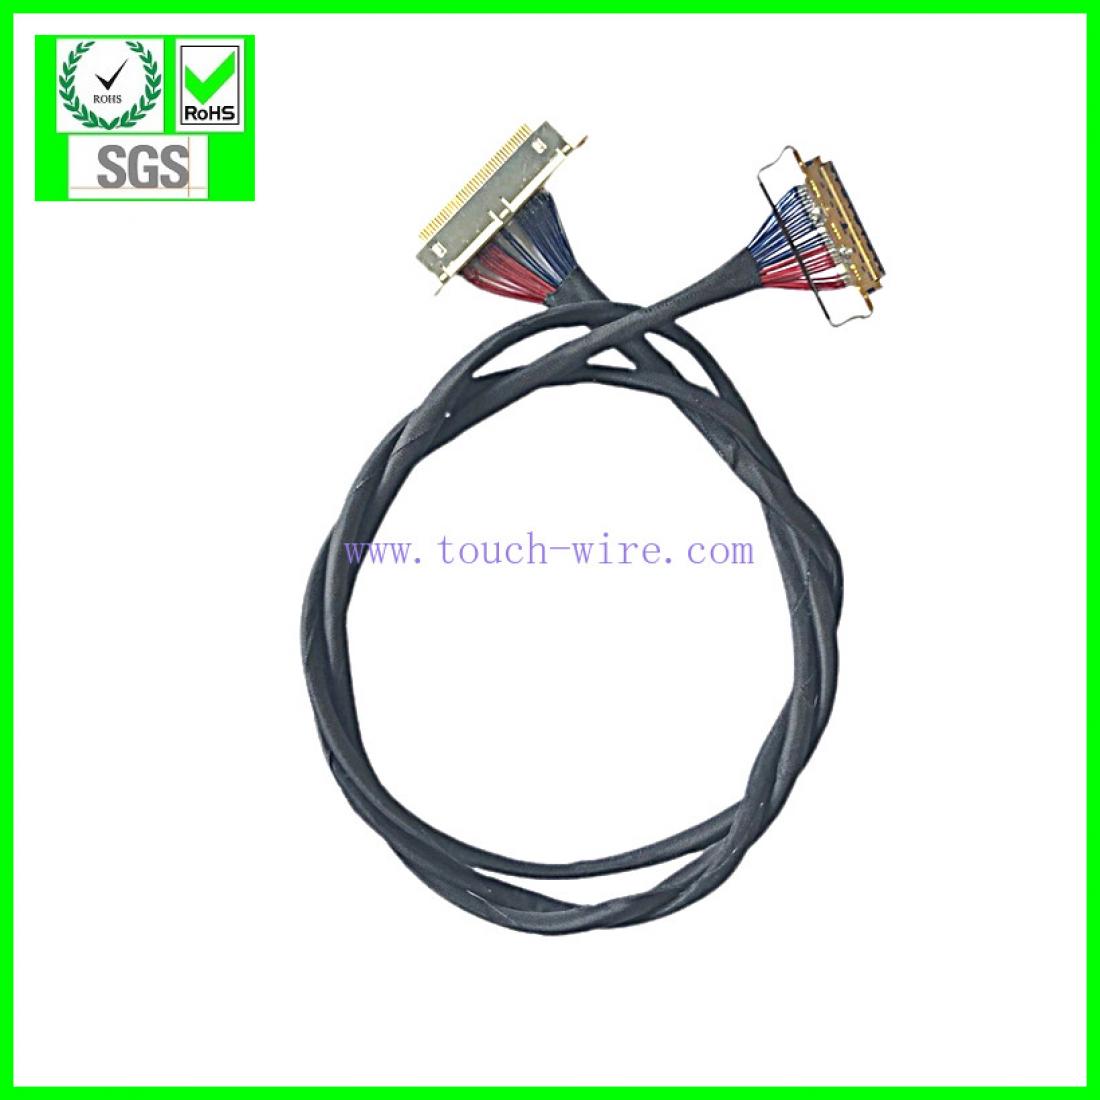 LVDS CABLE IPEX 20453 with pull bar and aces 88441 